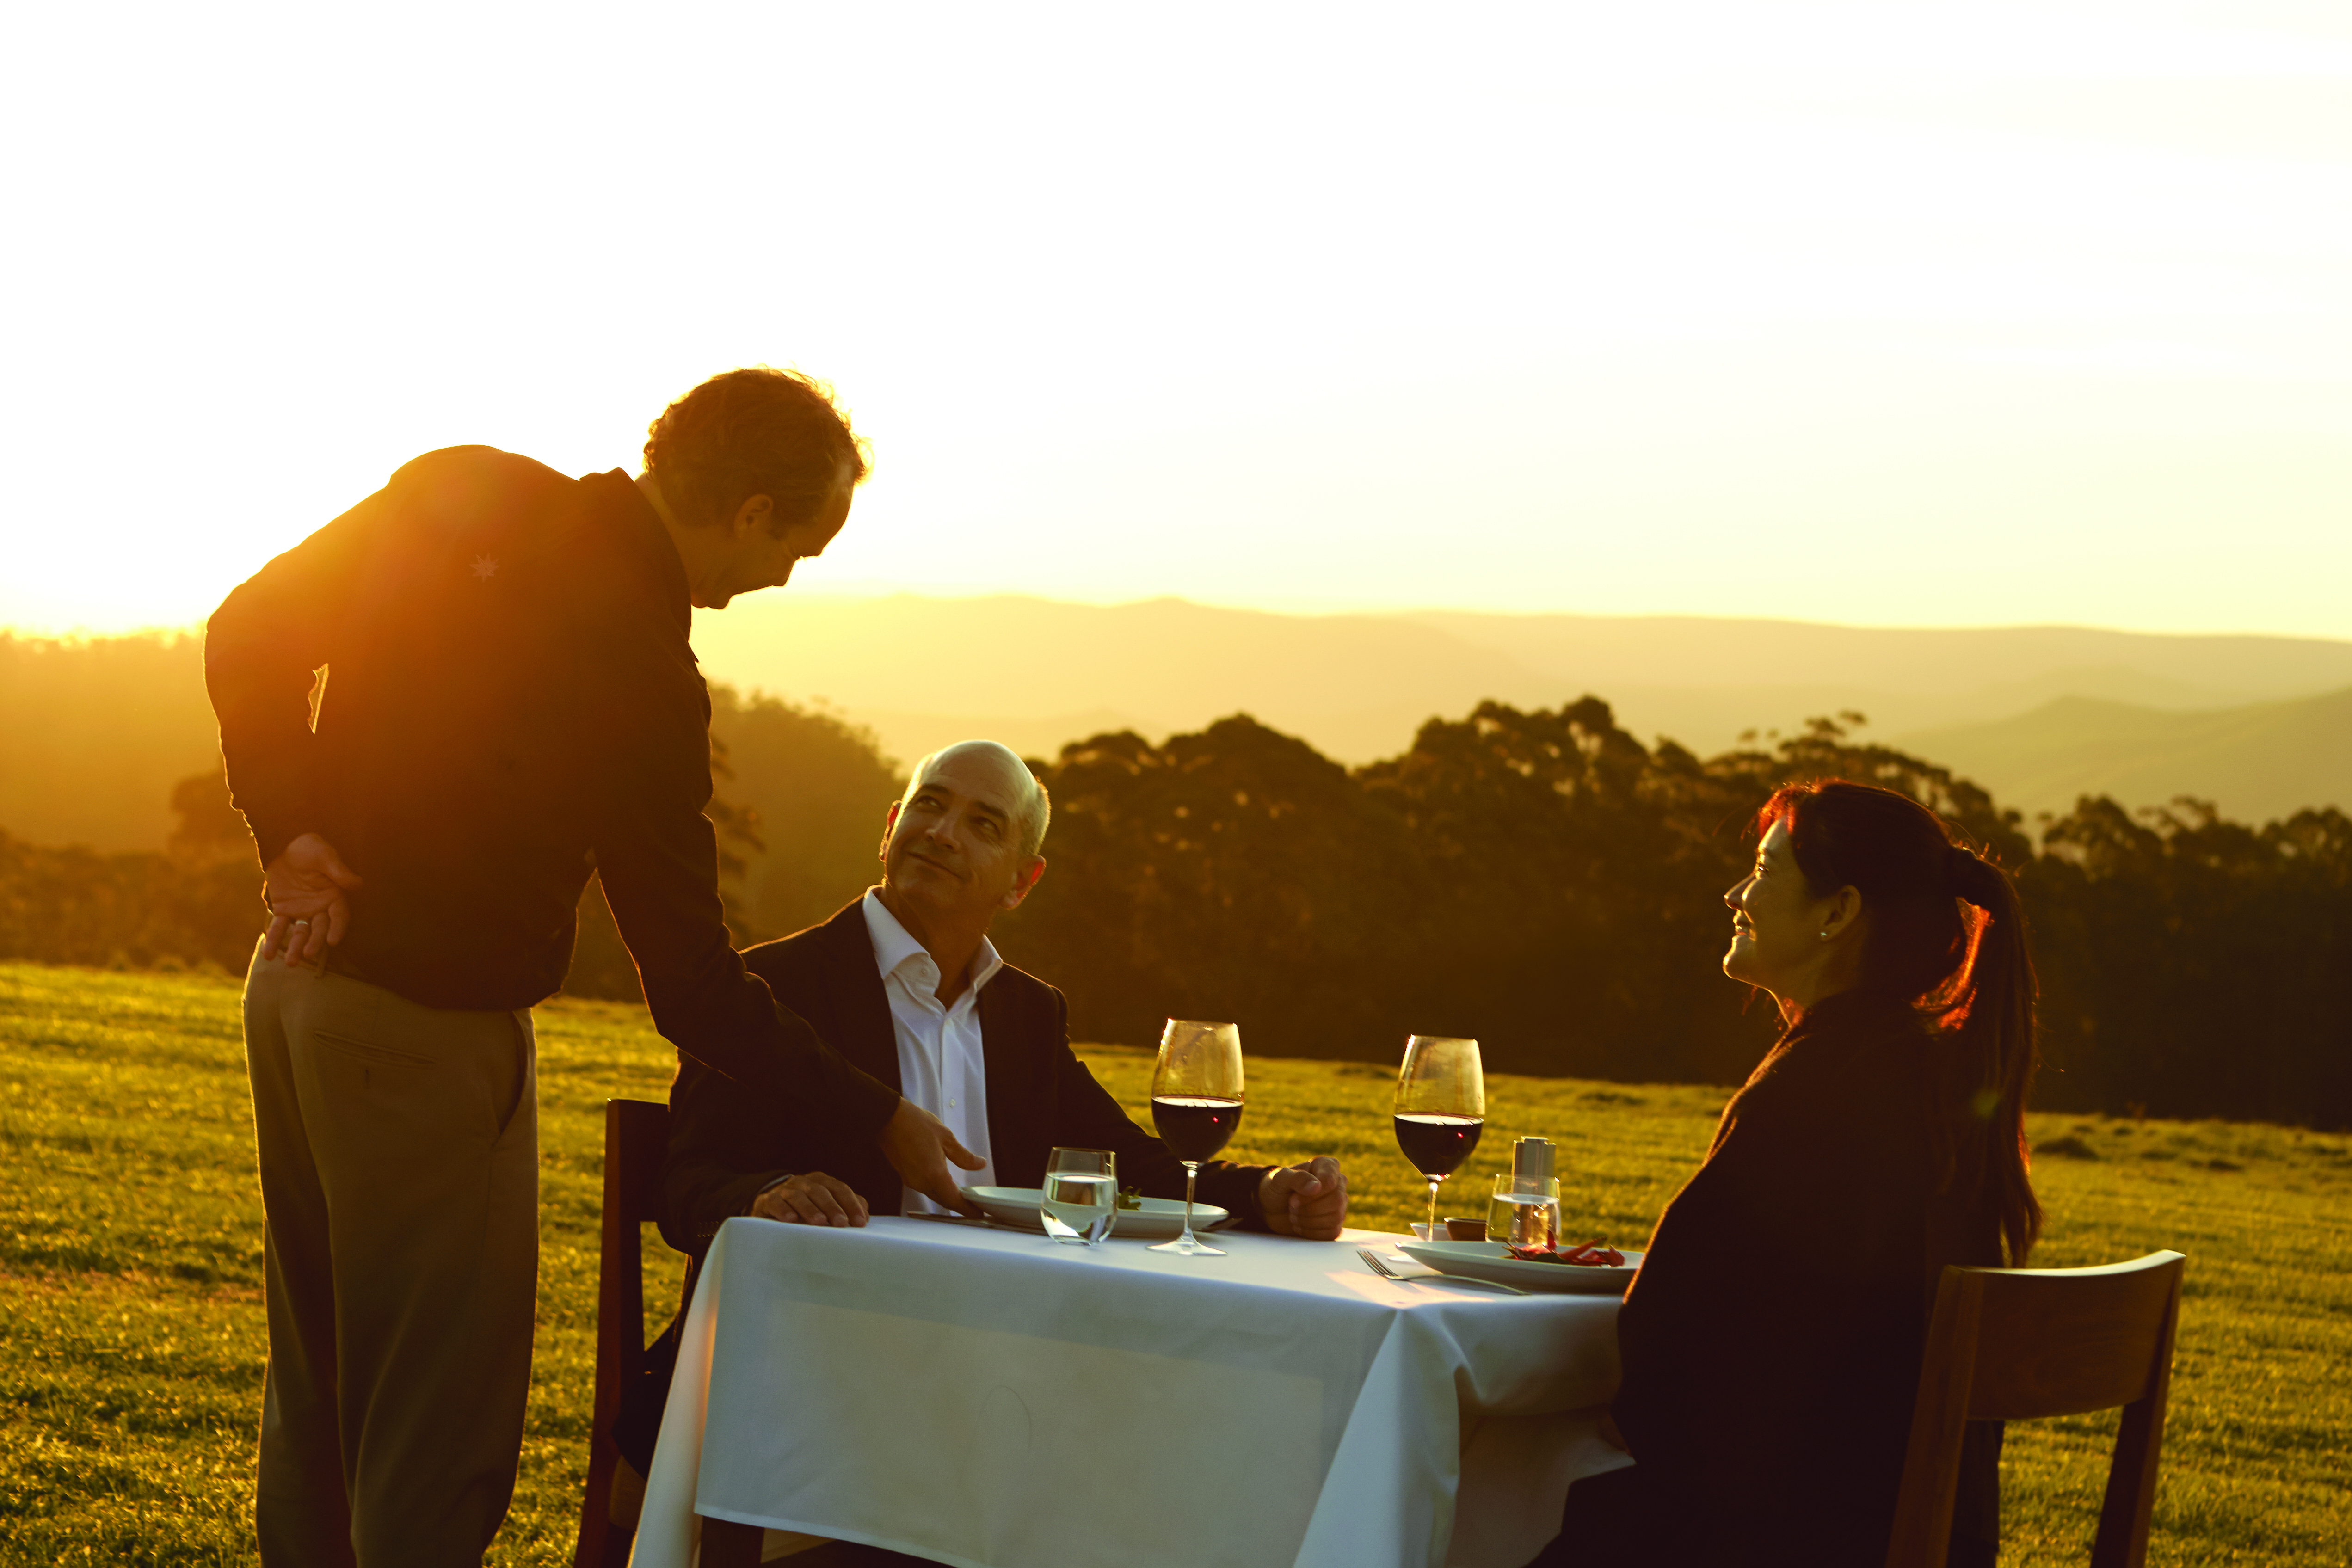 Spicers-Peak-Lodge_Scenic-Rim_Outdoor-dining-sunset - Click to view larger version